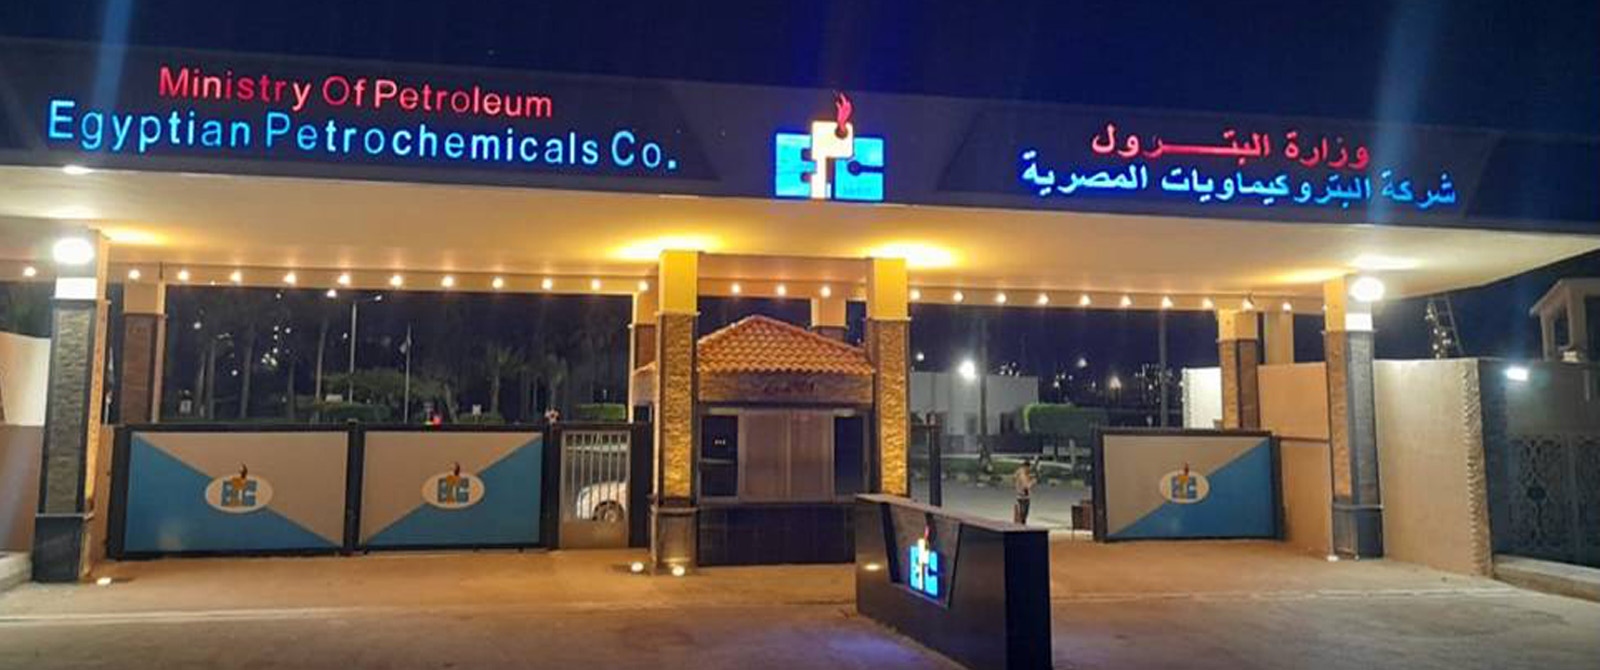 Egyptian Petrochemicals Co.